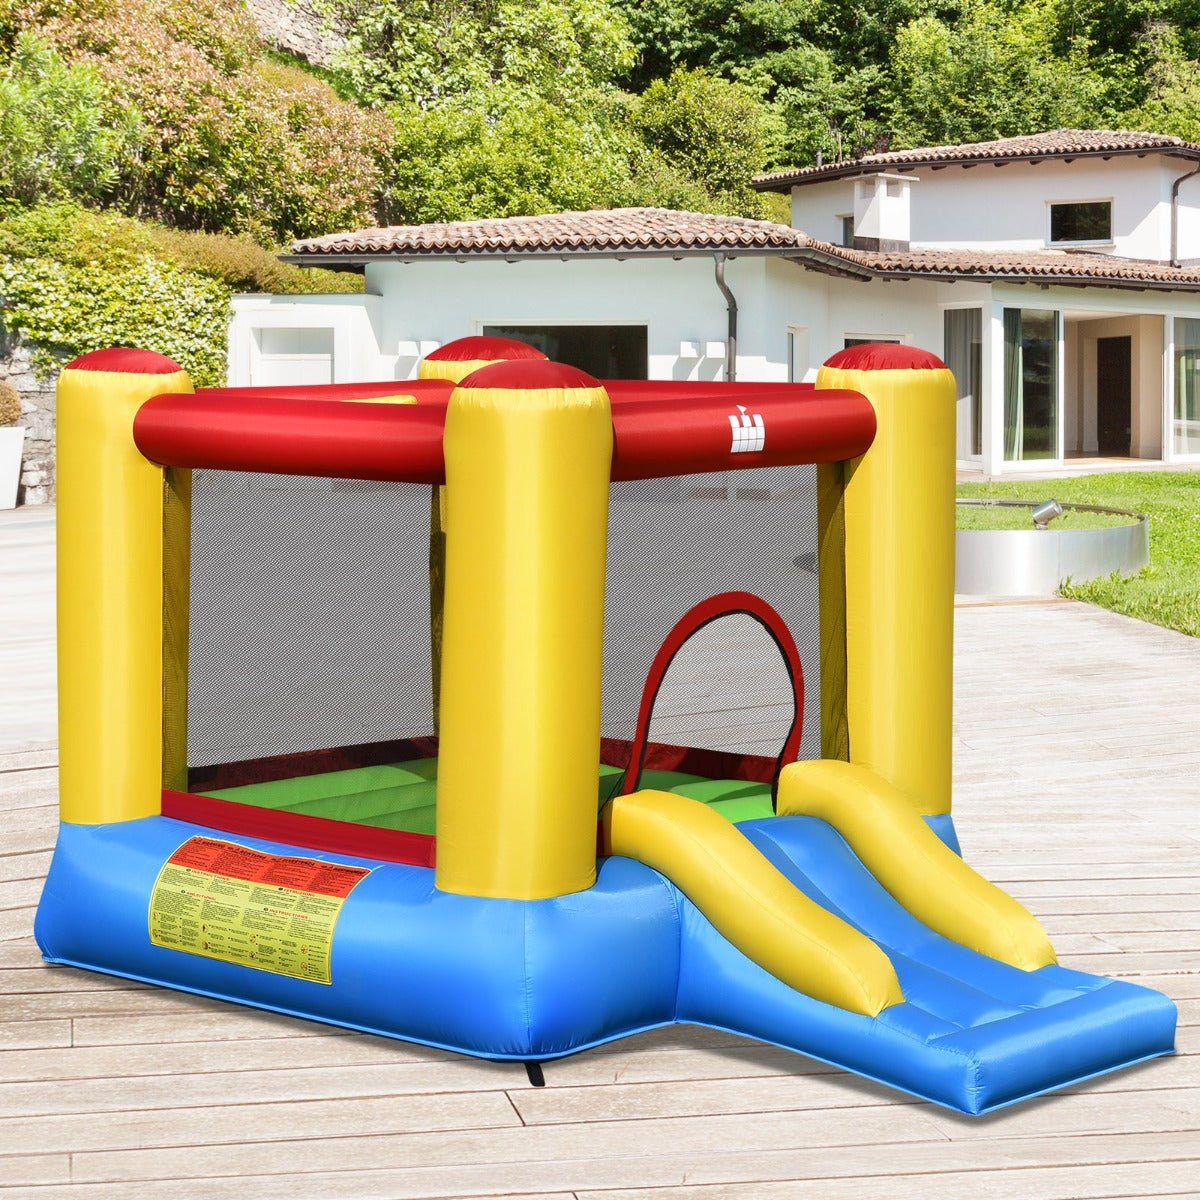 Outdoor Delight: Inflatable Bounce House Slide for Playful Kids